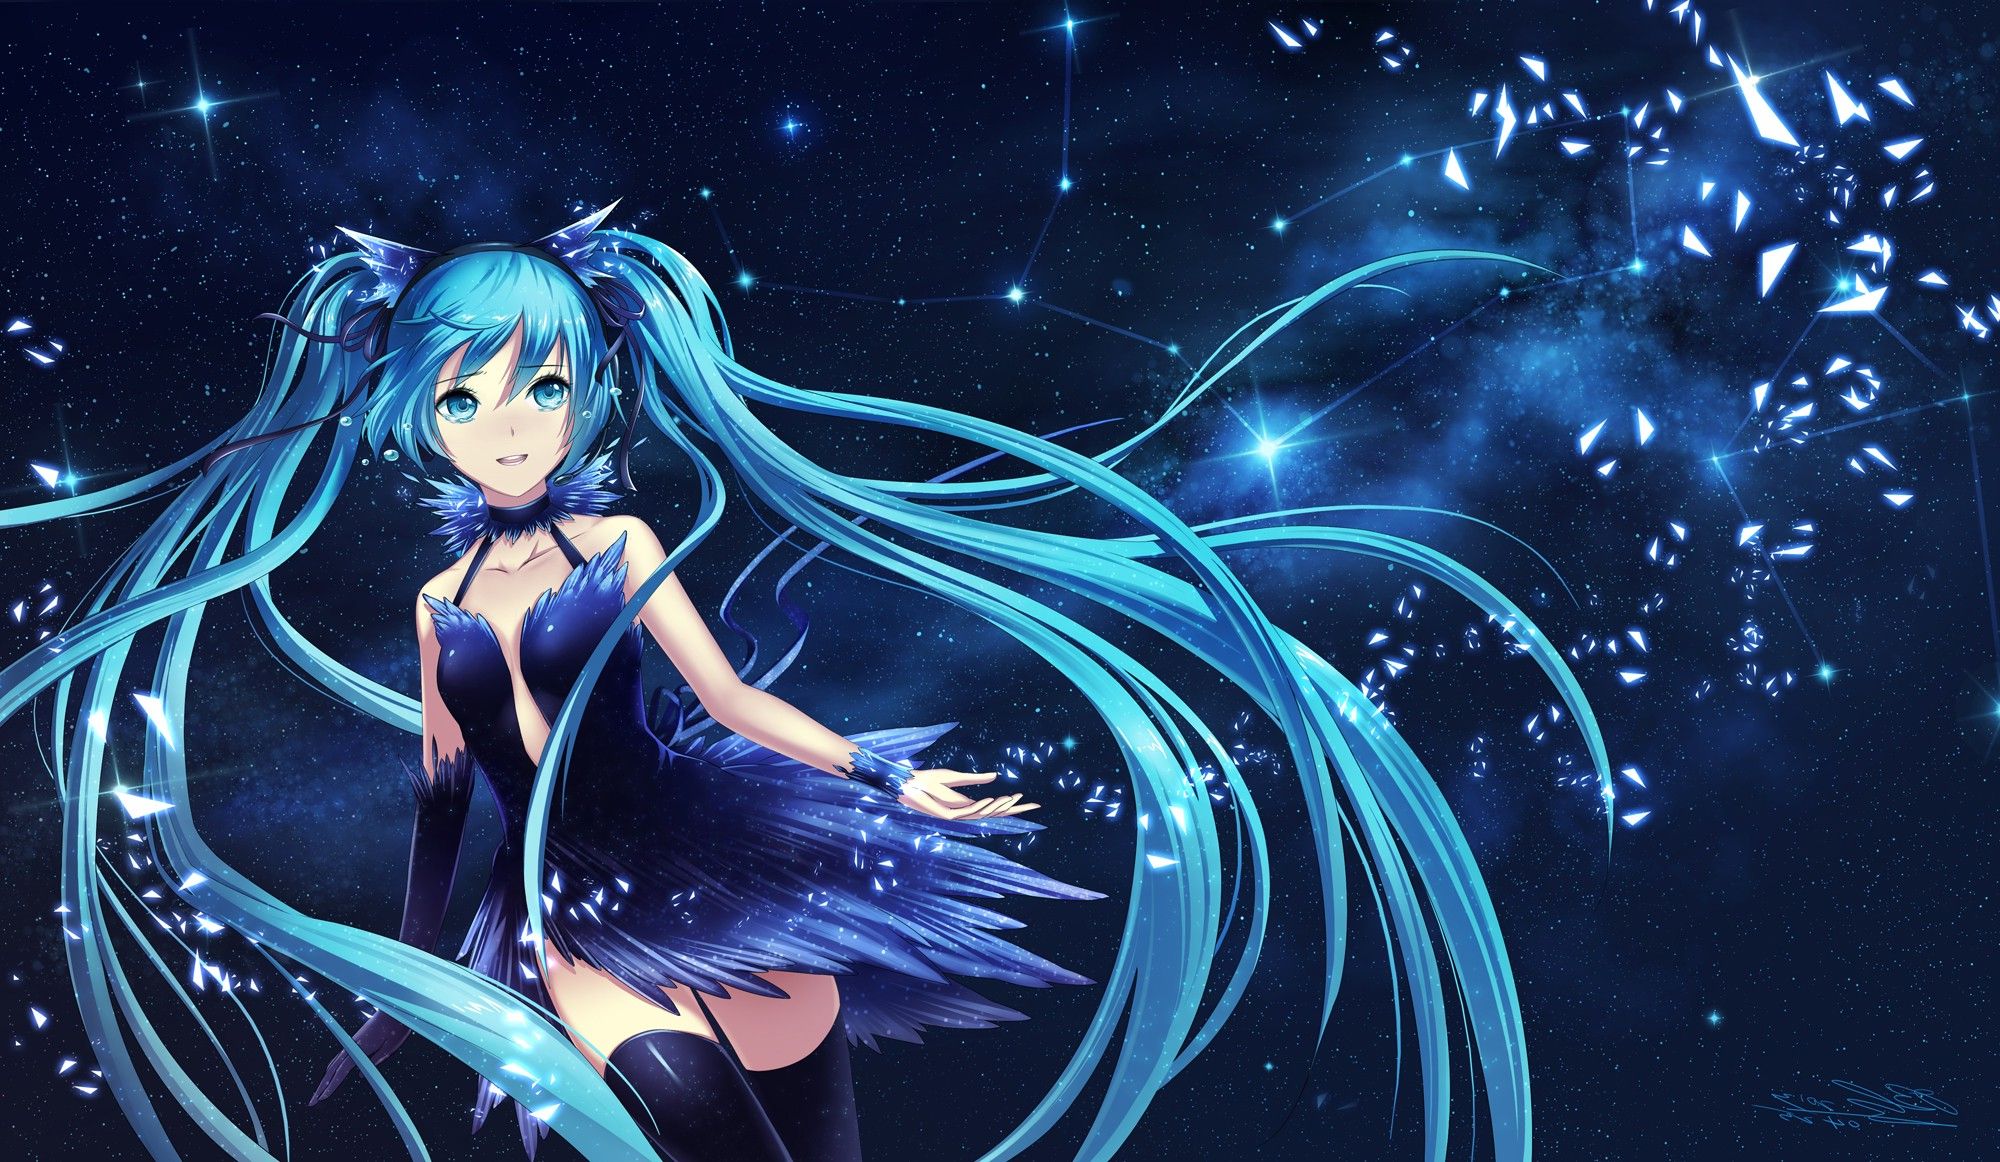 Cute anime girl with blue hair wallpaper - wide 5